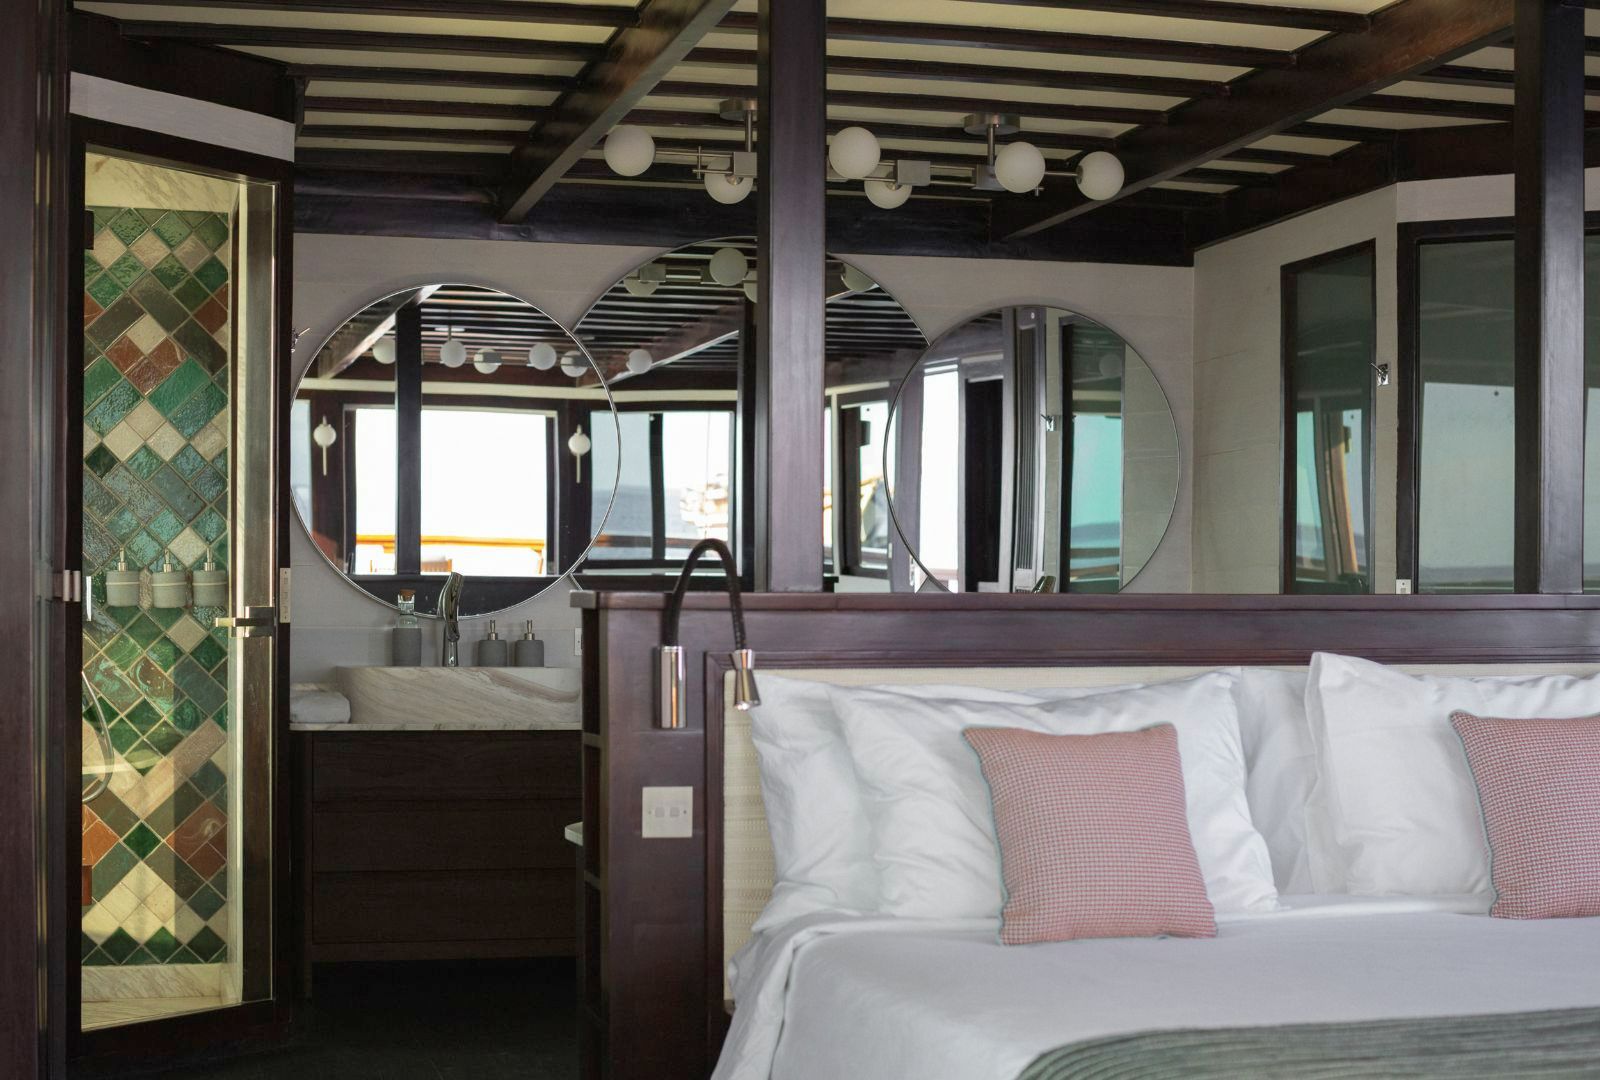 Guest bedroom onboard the Vela Phinisi in Indonesia